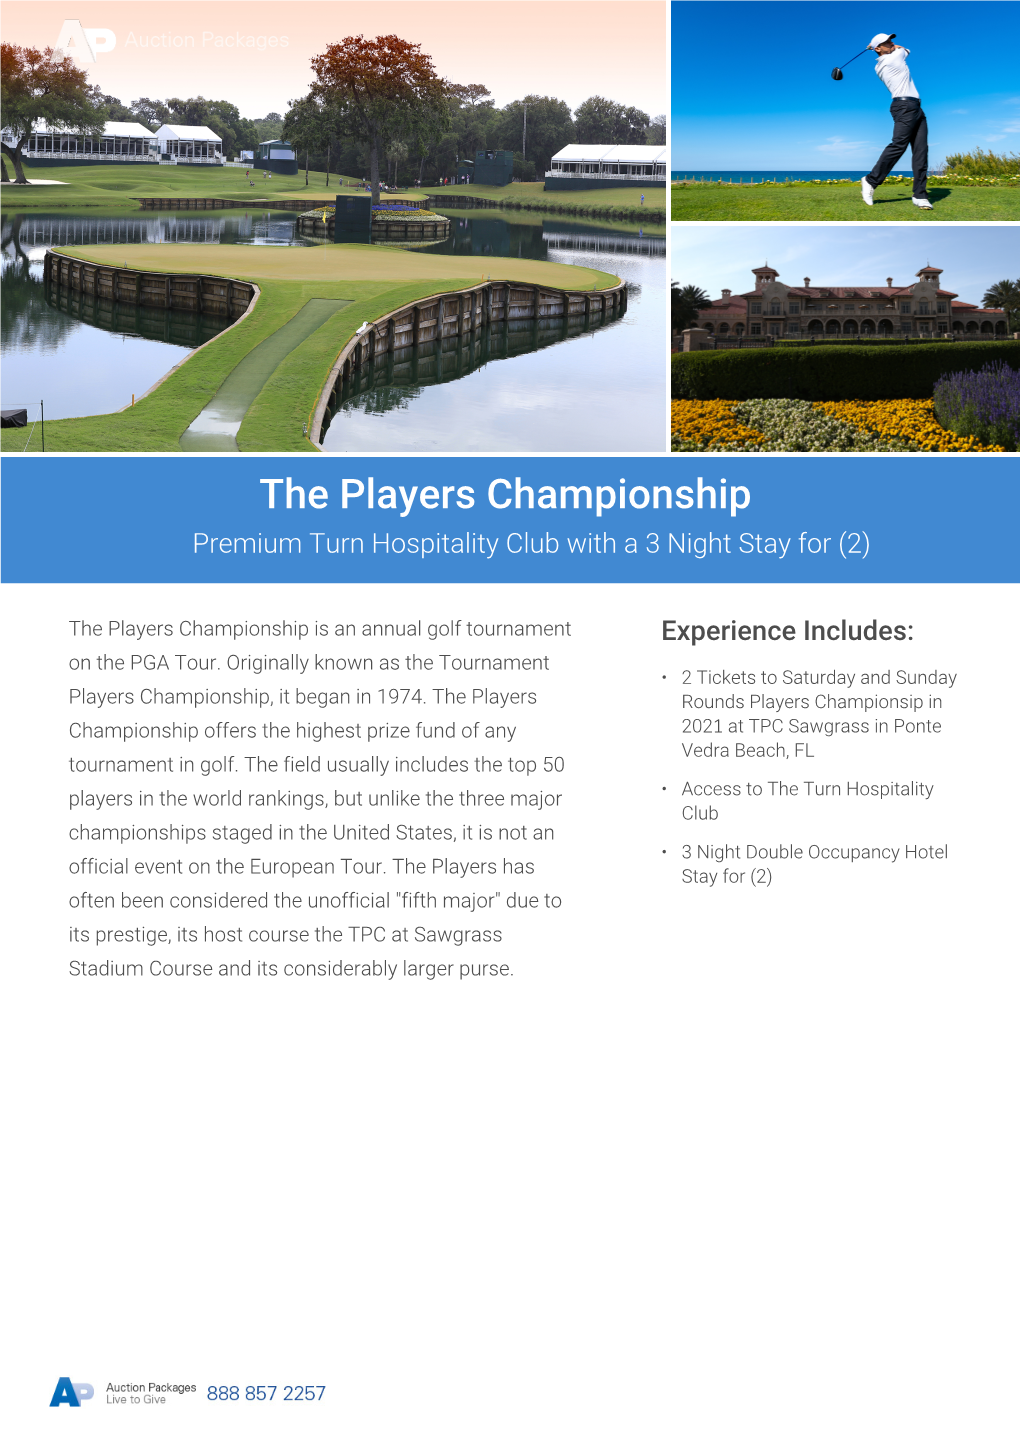 The Players Championship Premium Turn Hospitality Club with a 3 Night Stay for (2)